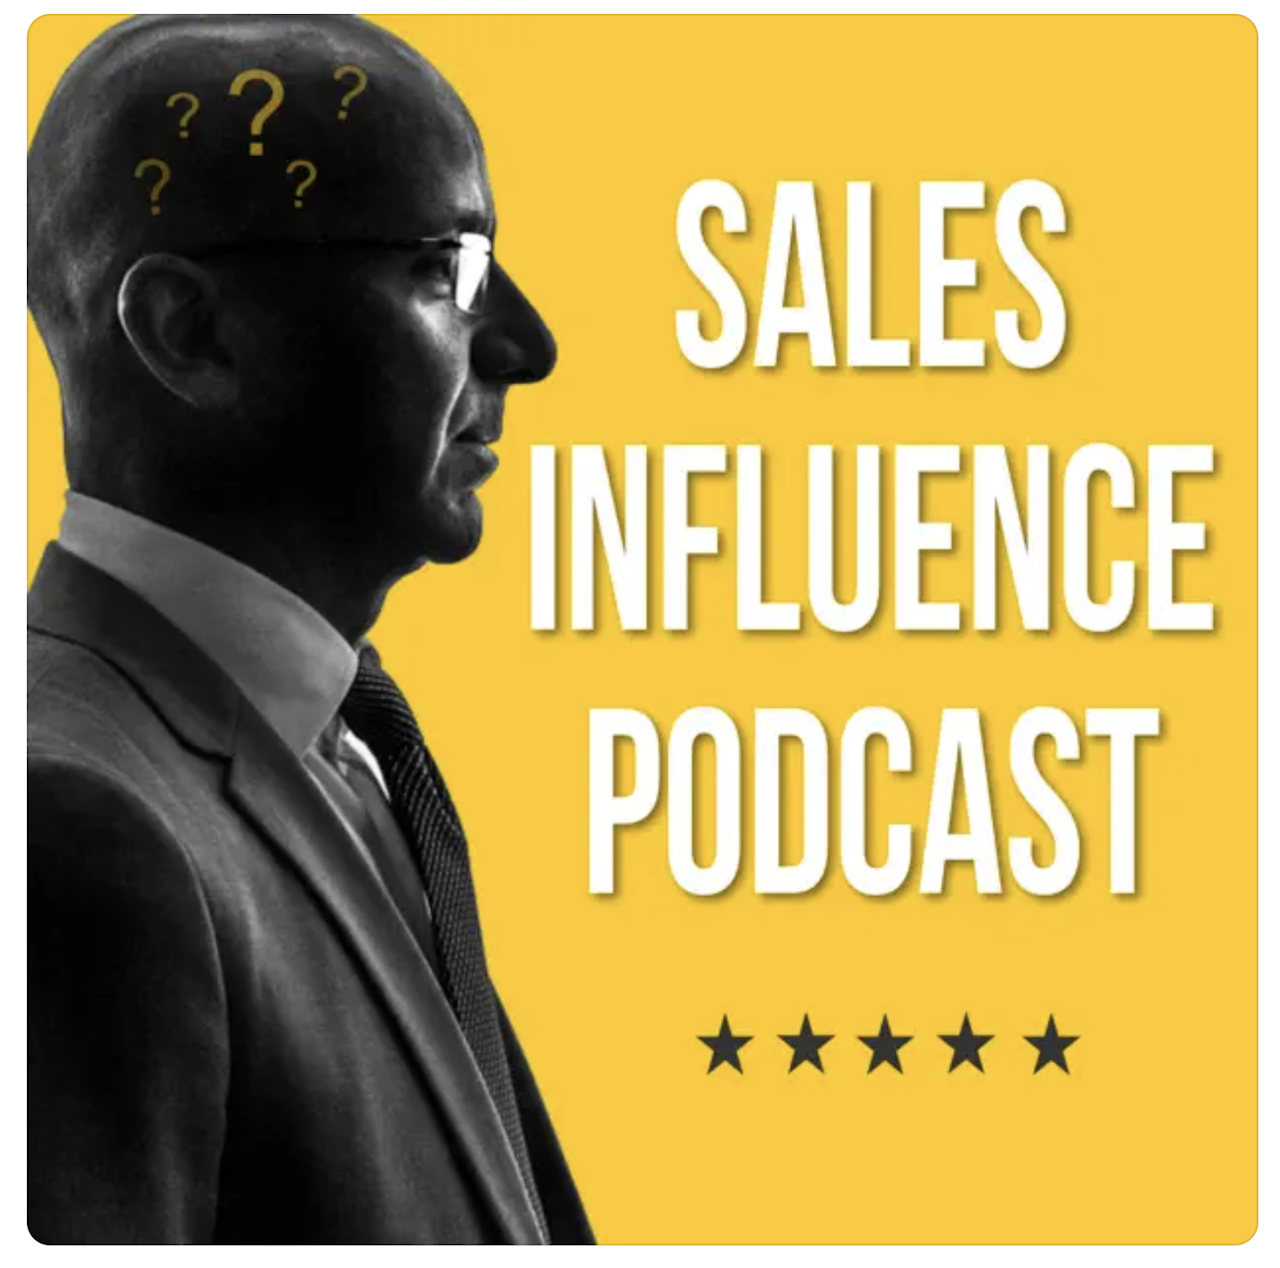 Best Sales Podcasts: Sales Influence